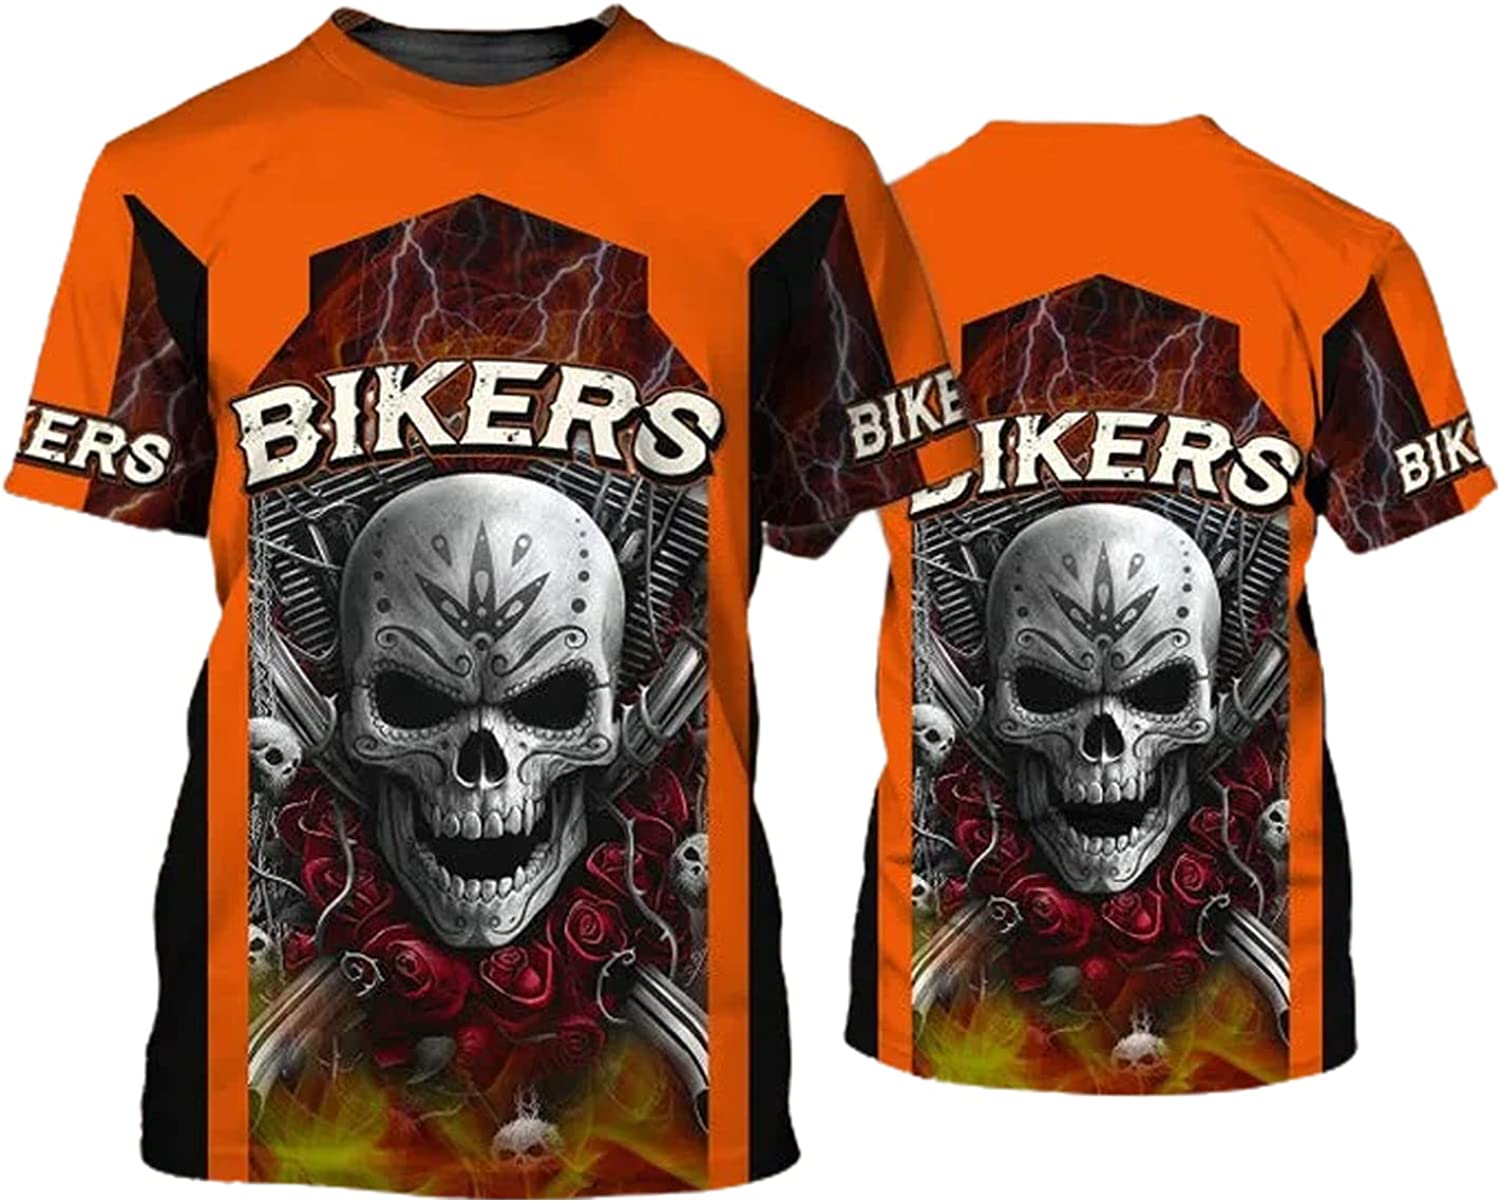 3d printed biker shirt with personalized design perfect gift for biker enthusiasts and baseball players jot1586 sanvs